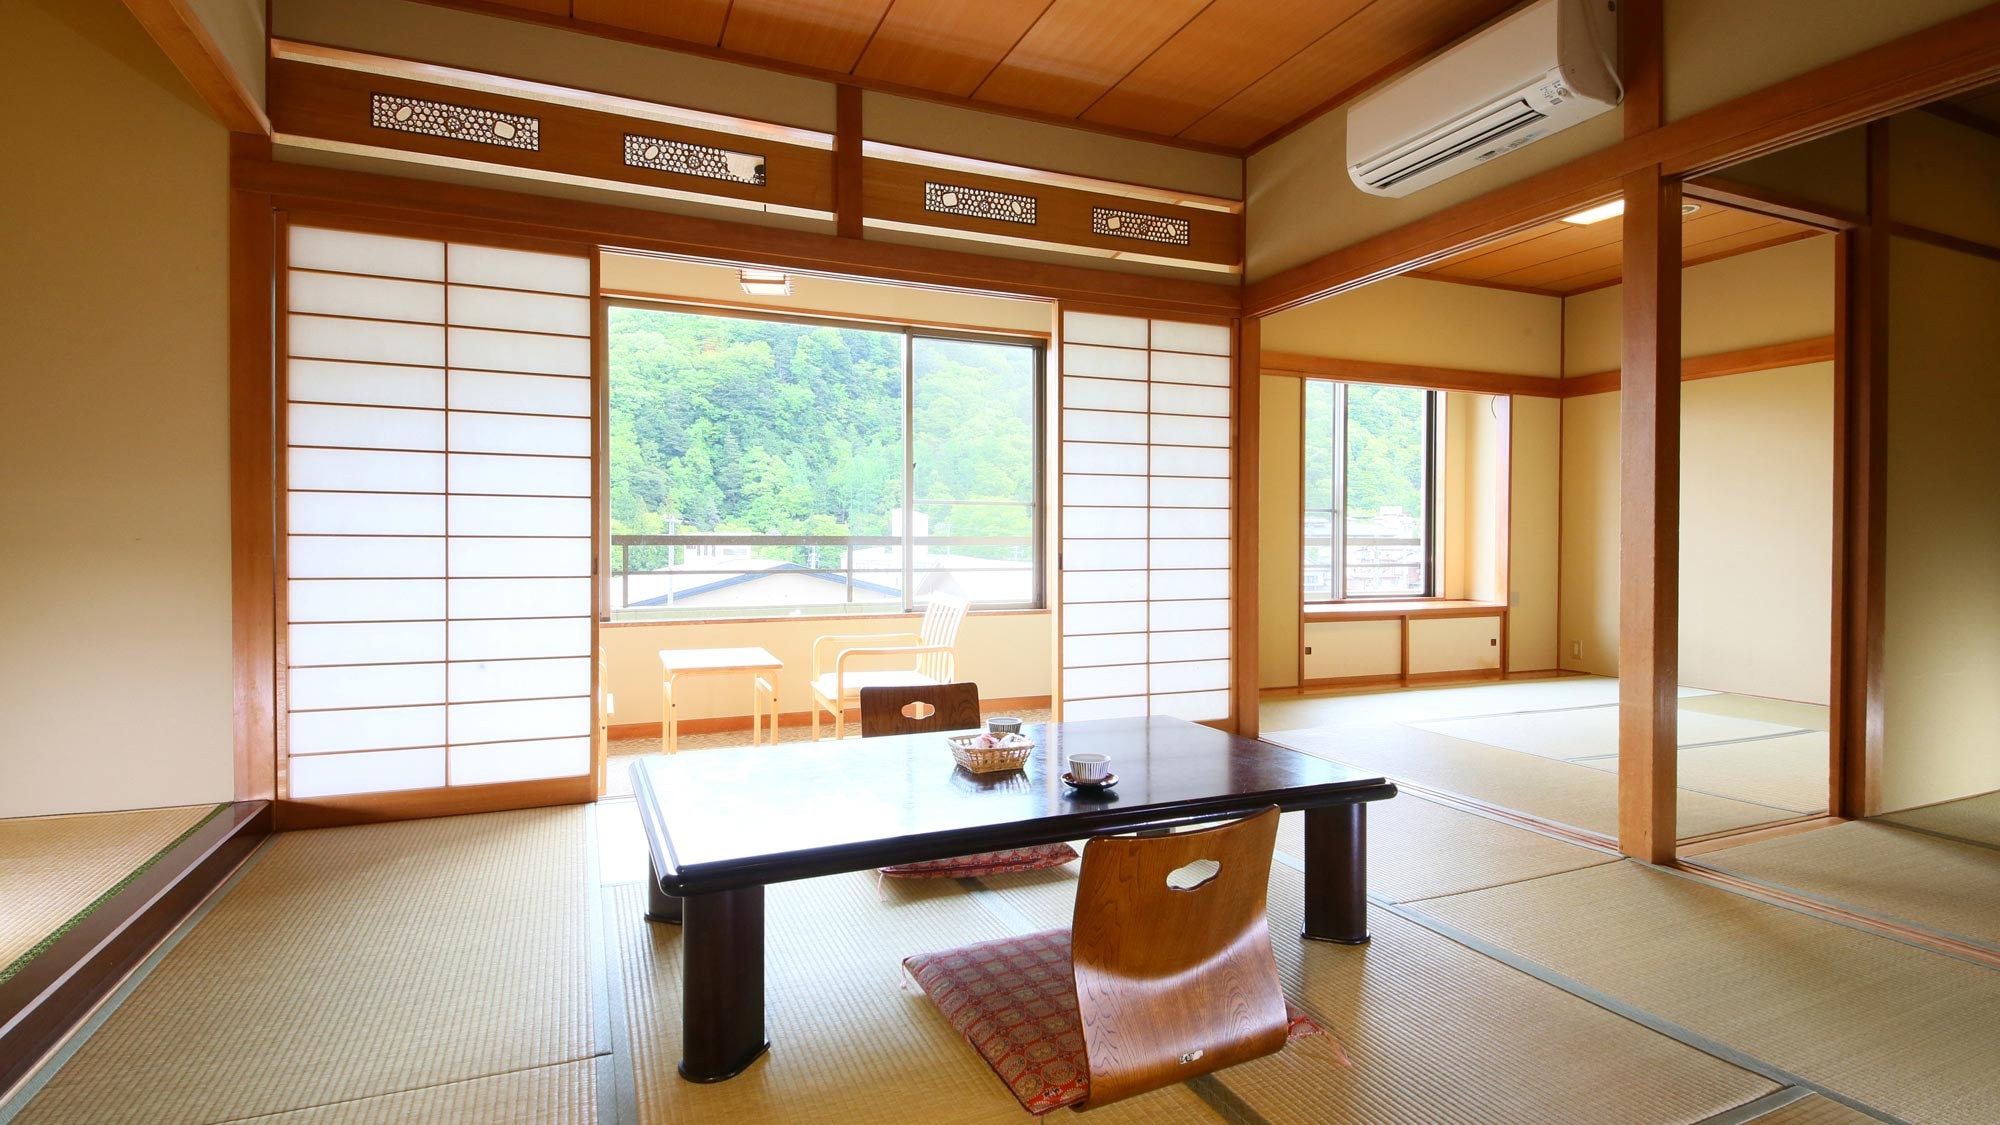 There is also a spacious Japanese-style room